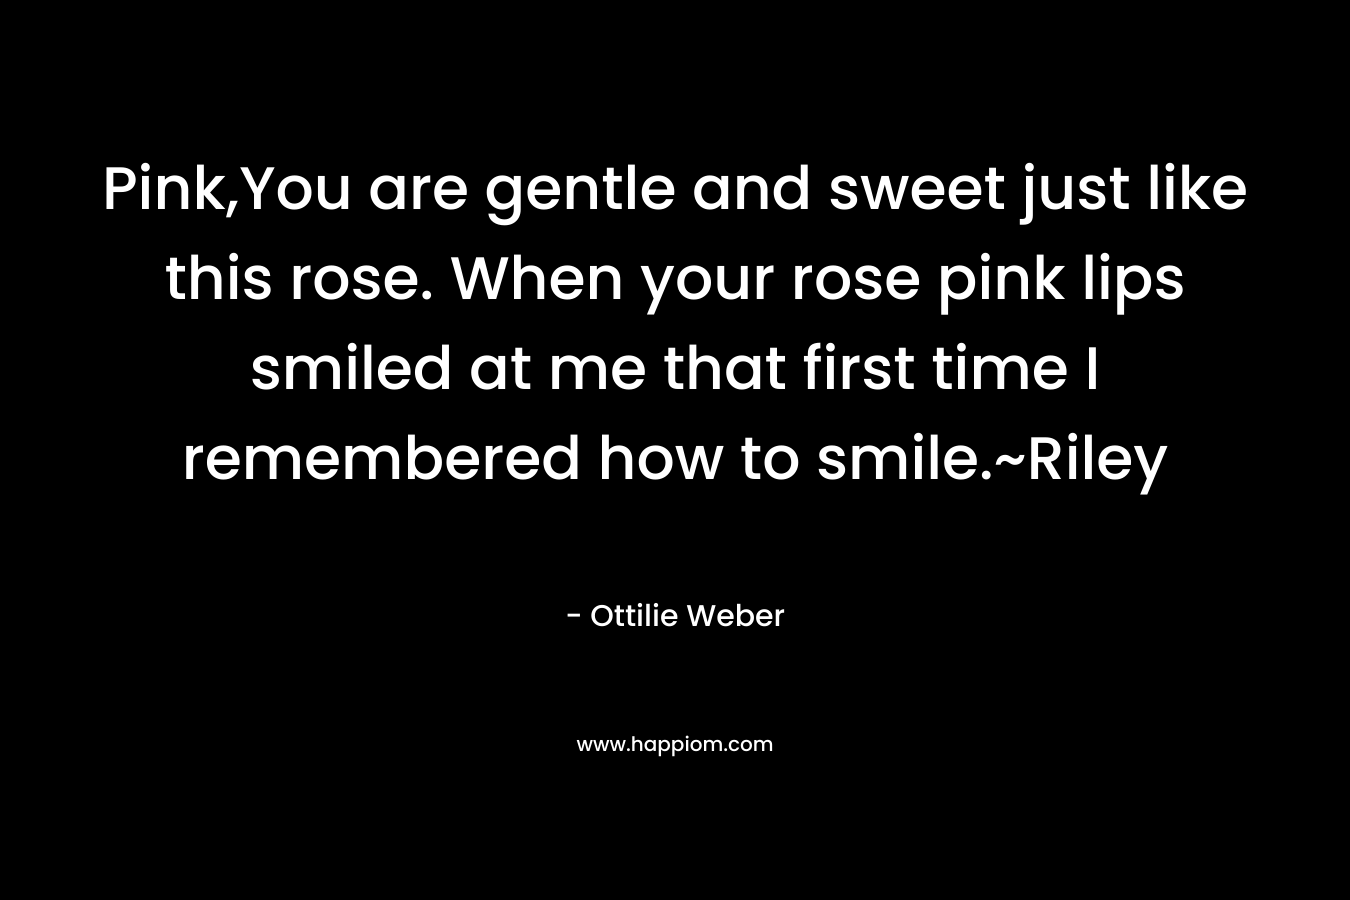 Pink,You are gentle and sweet just like this rose. When your rose pink lips smiled at me that first time I remembered how to smile.~Riley